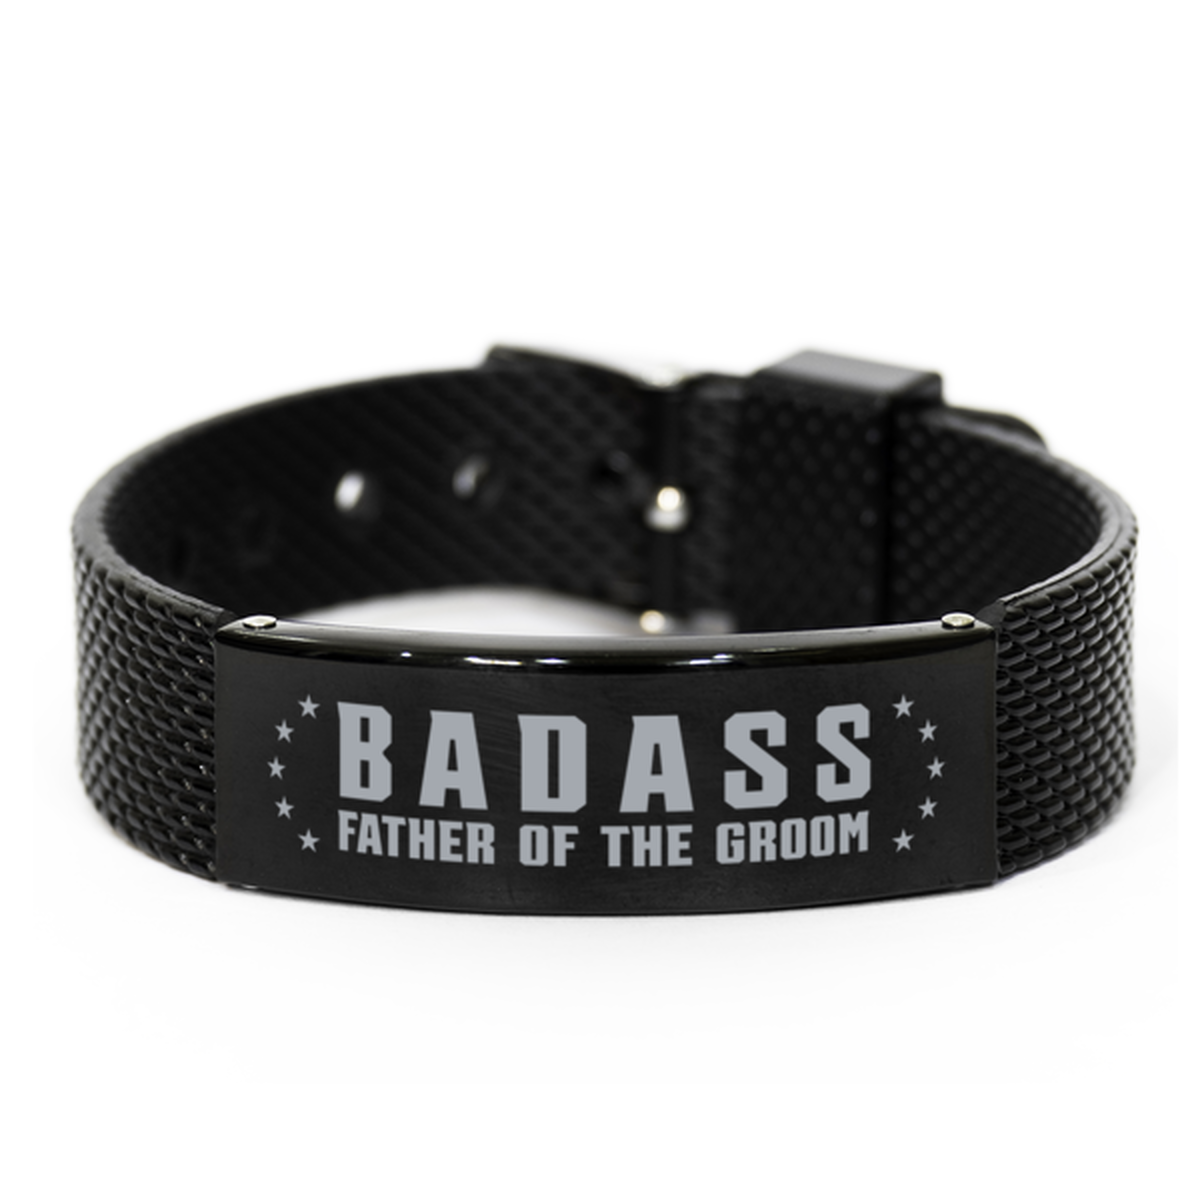 Father of the groom Black Shark Mesh Bracelet, Badass Father of the Broom, Funny Family Gifts For Father of the groom From Son Daughter